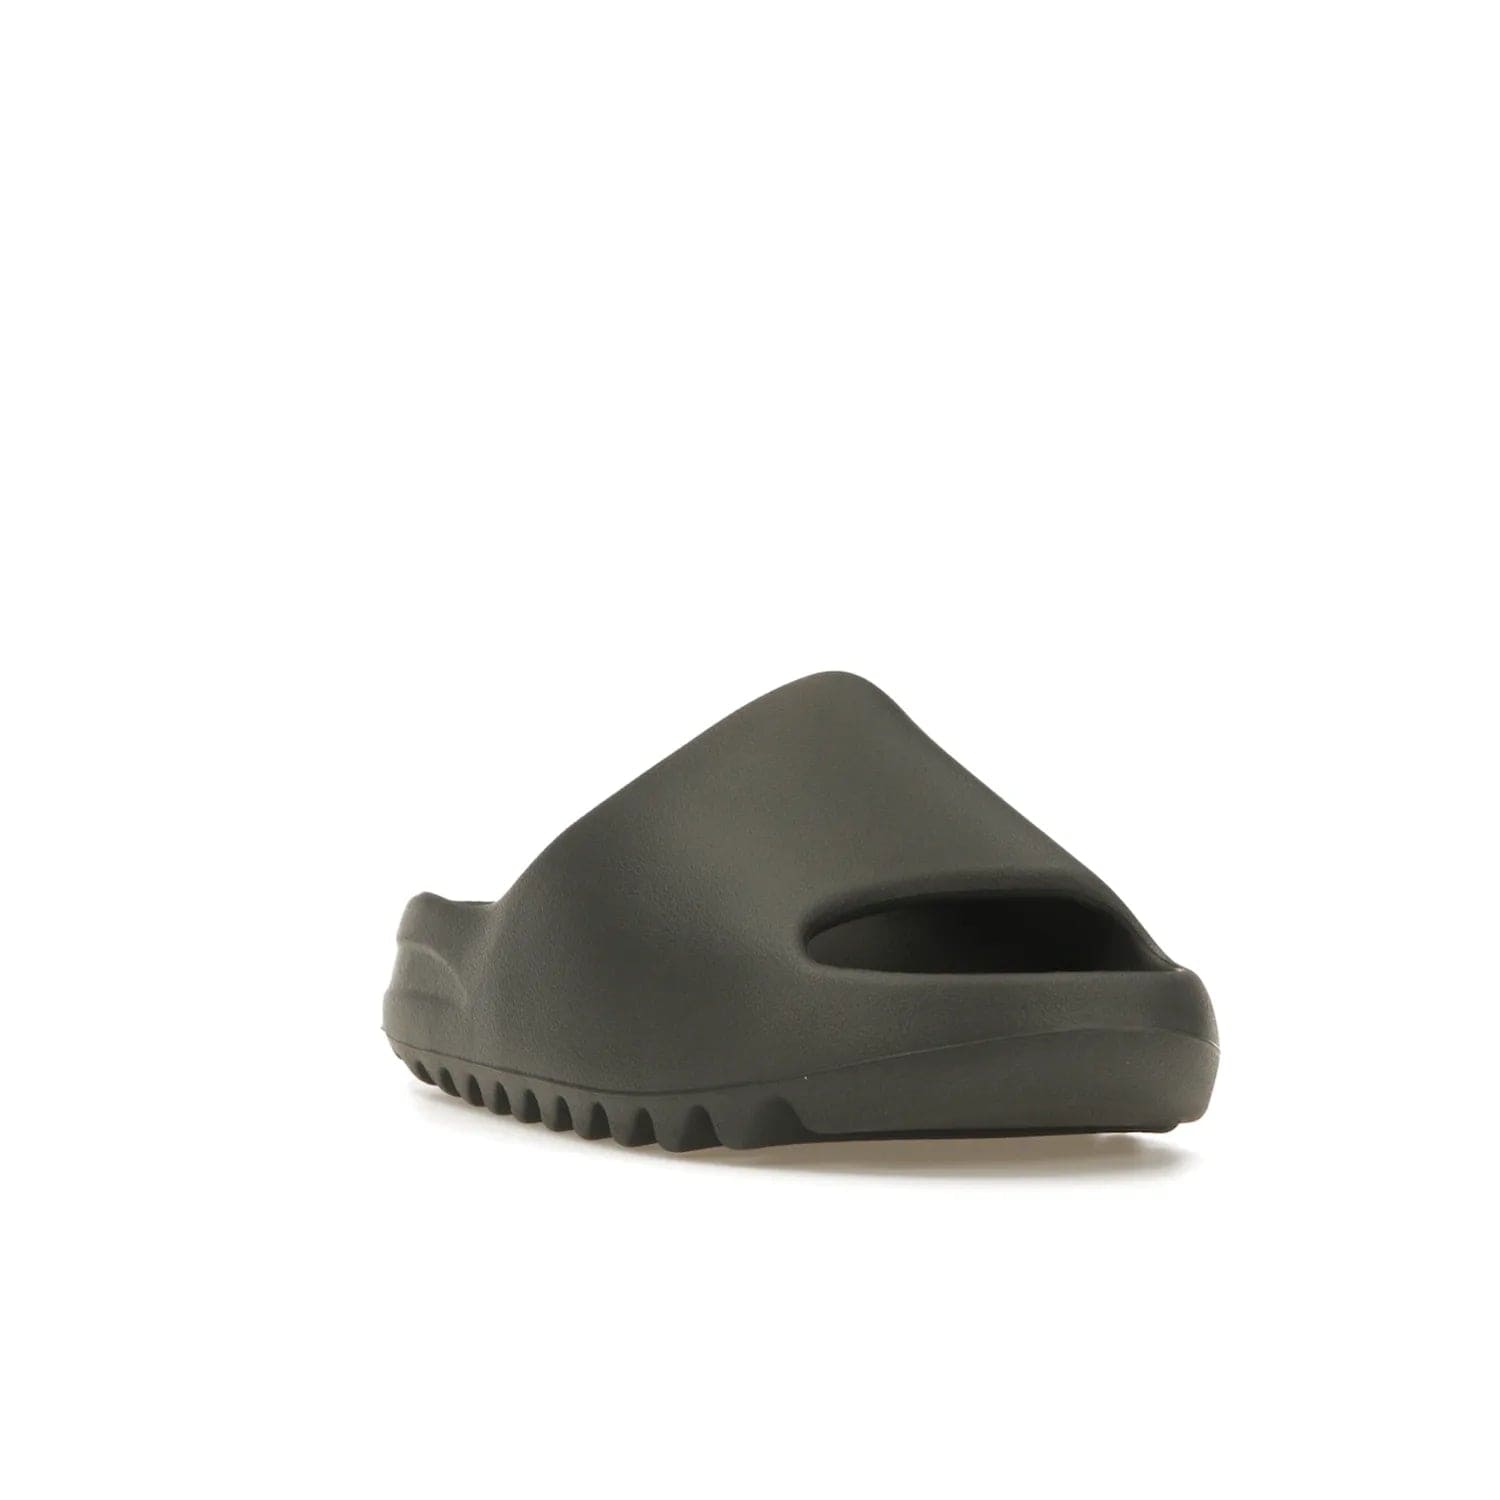 adidas Yeezy Slide Granite - Image 7 - Only at www.BallersClubKickz.com - Introducing the adidas Yeezy Slide Granite with a sleek, soft-to-touch one-piece upper – perfect for making a statement with its minimalistic design and luxurious comfort. Get yours now for only $70.